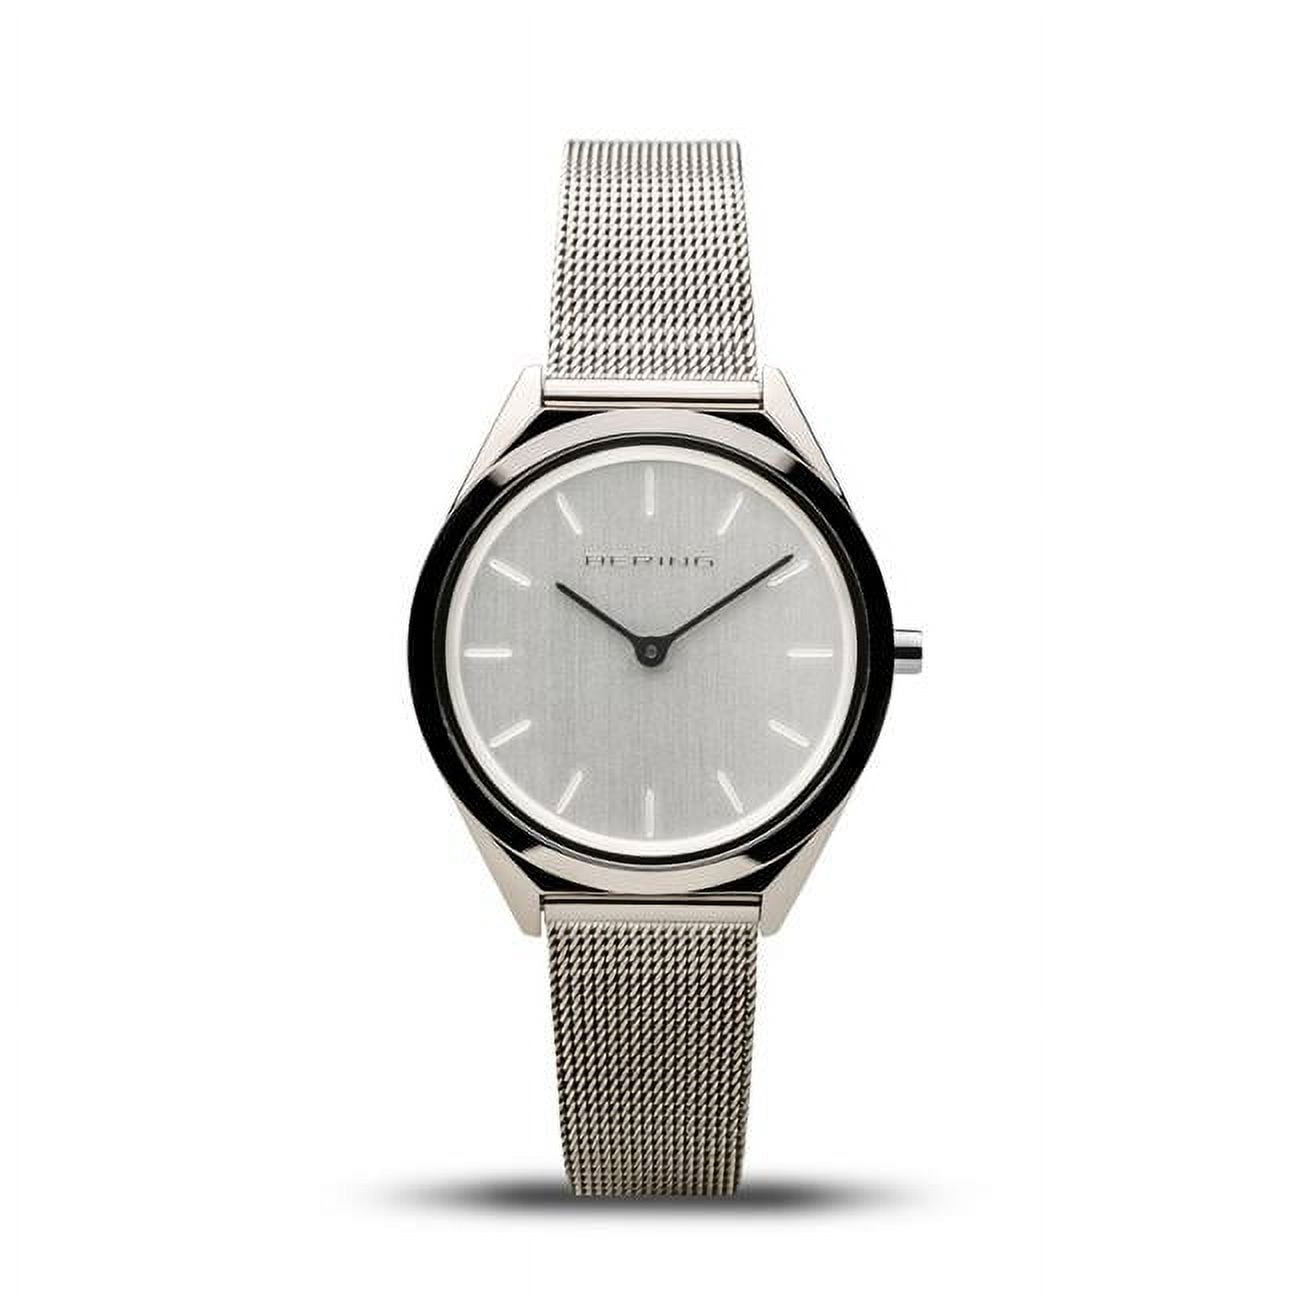 Picture of Bering 17031-000 Unisex Ultra Slim Polished Silver Mesh Watch with Silver Dial